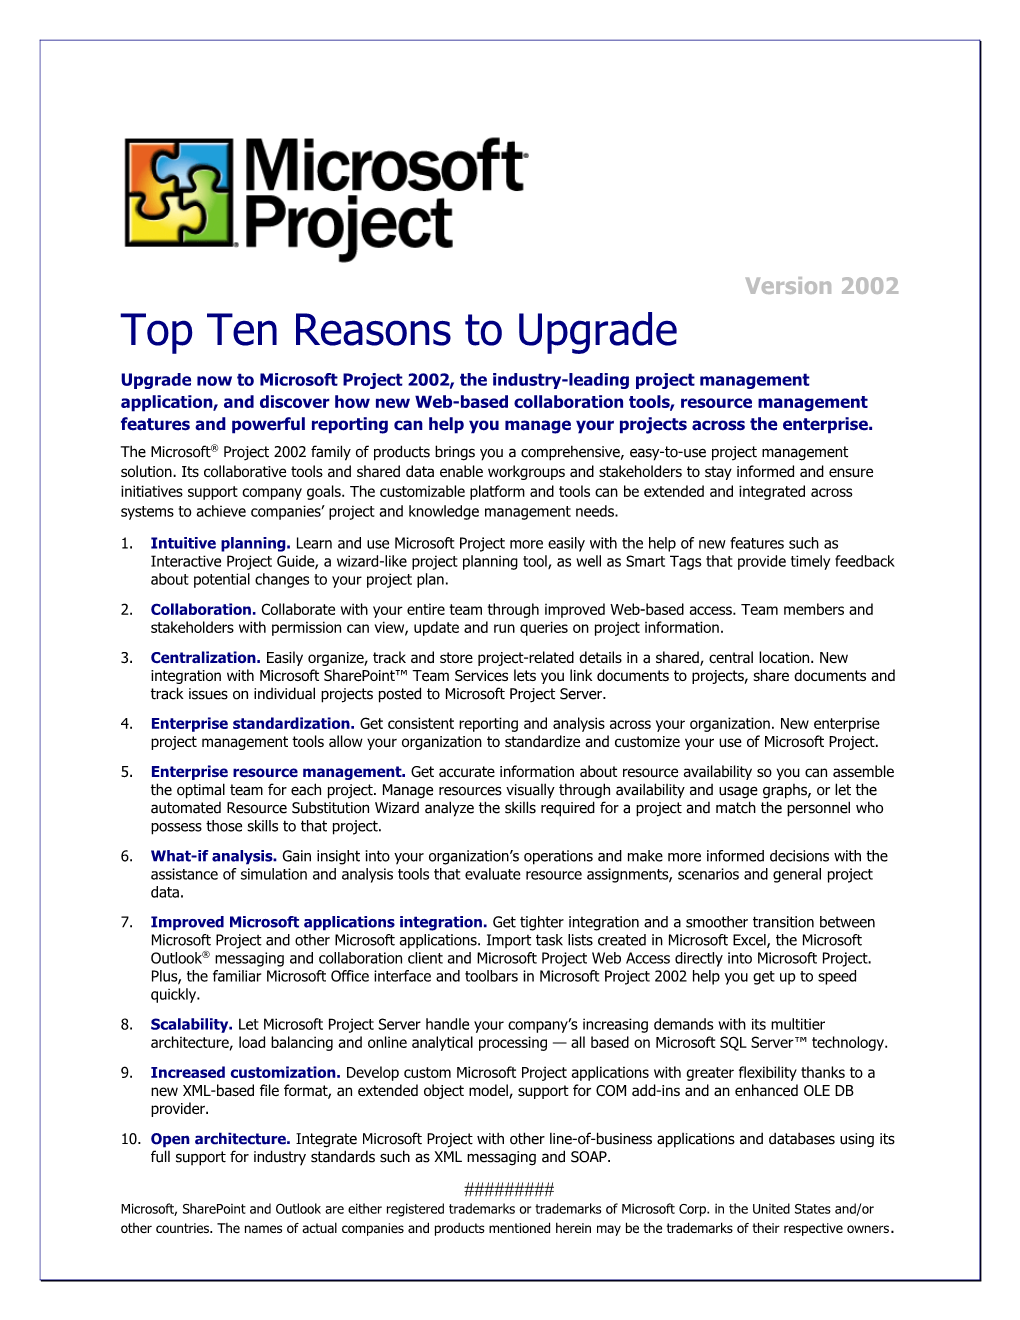 Project 2002 Top 10 Reasons to Upgrade